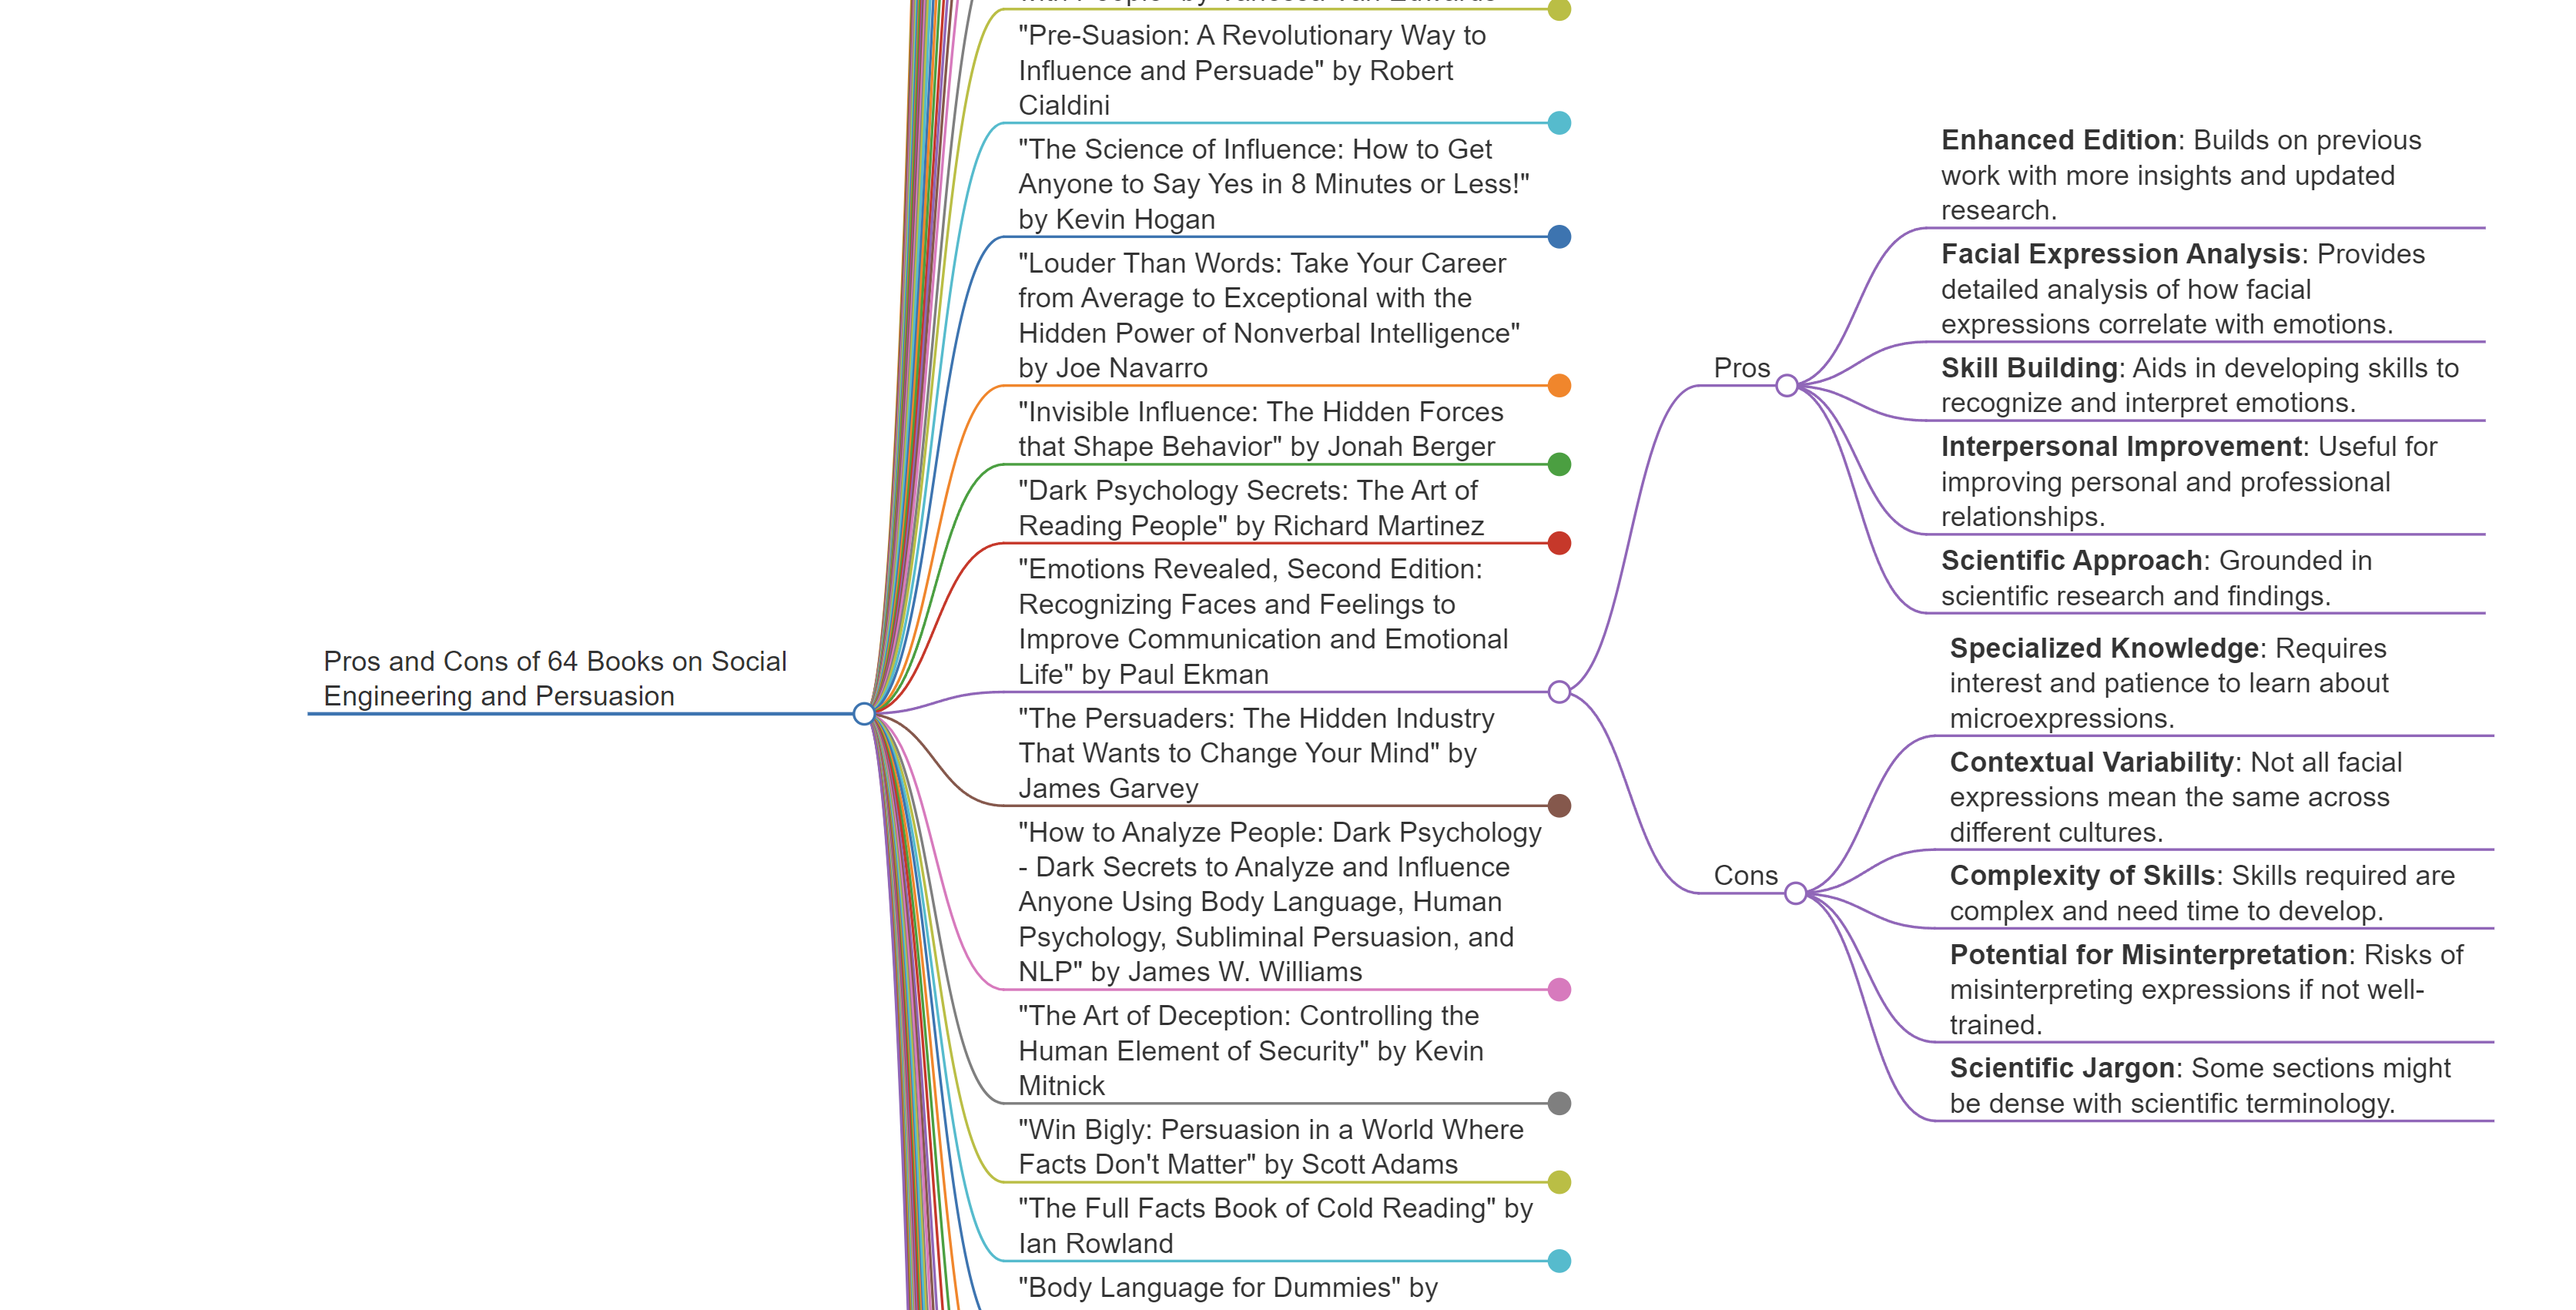 Interactive Mindmap of Social Engineering and Persuasion Books